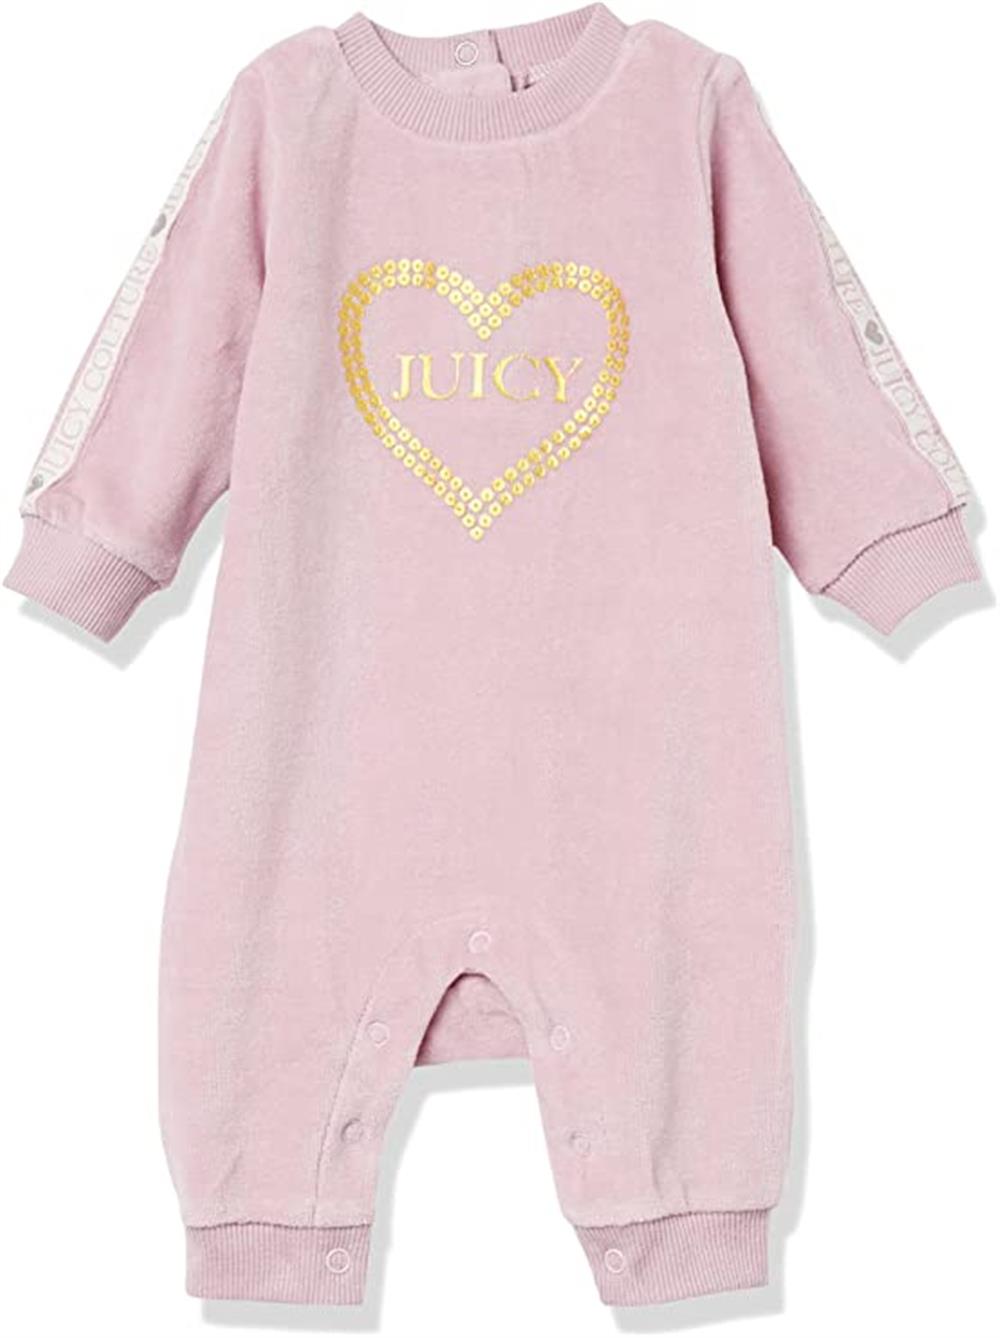 Juicy Couture Girls Foil Heart Velour Coverall